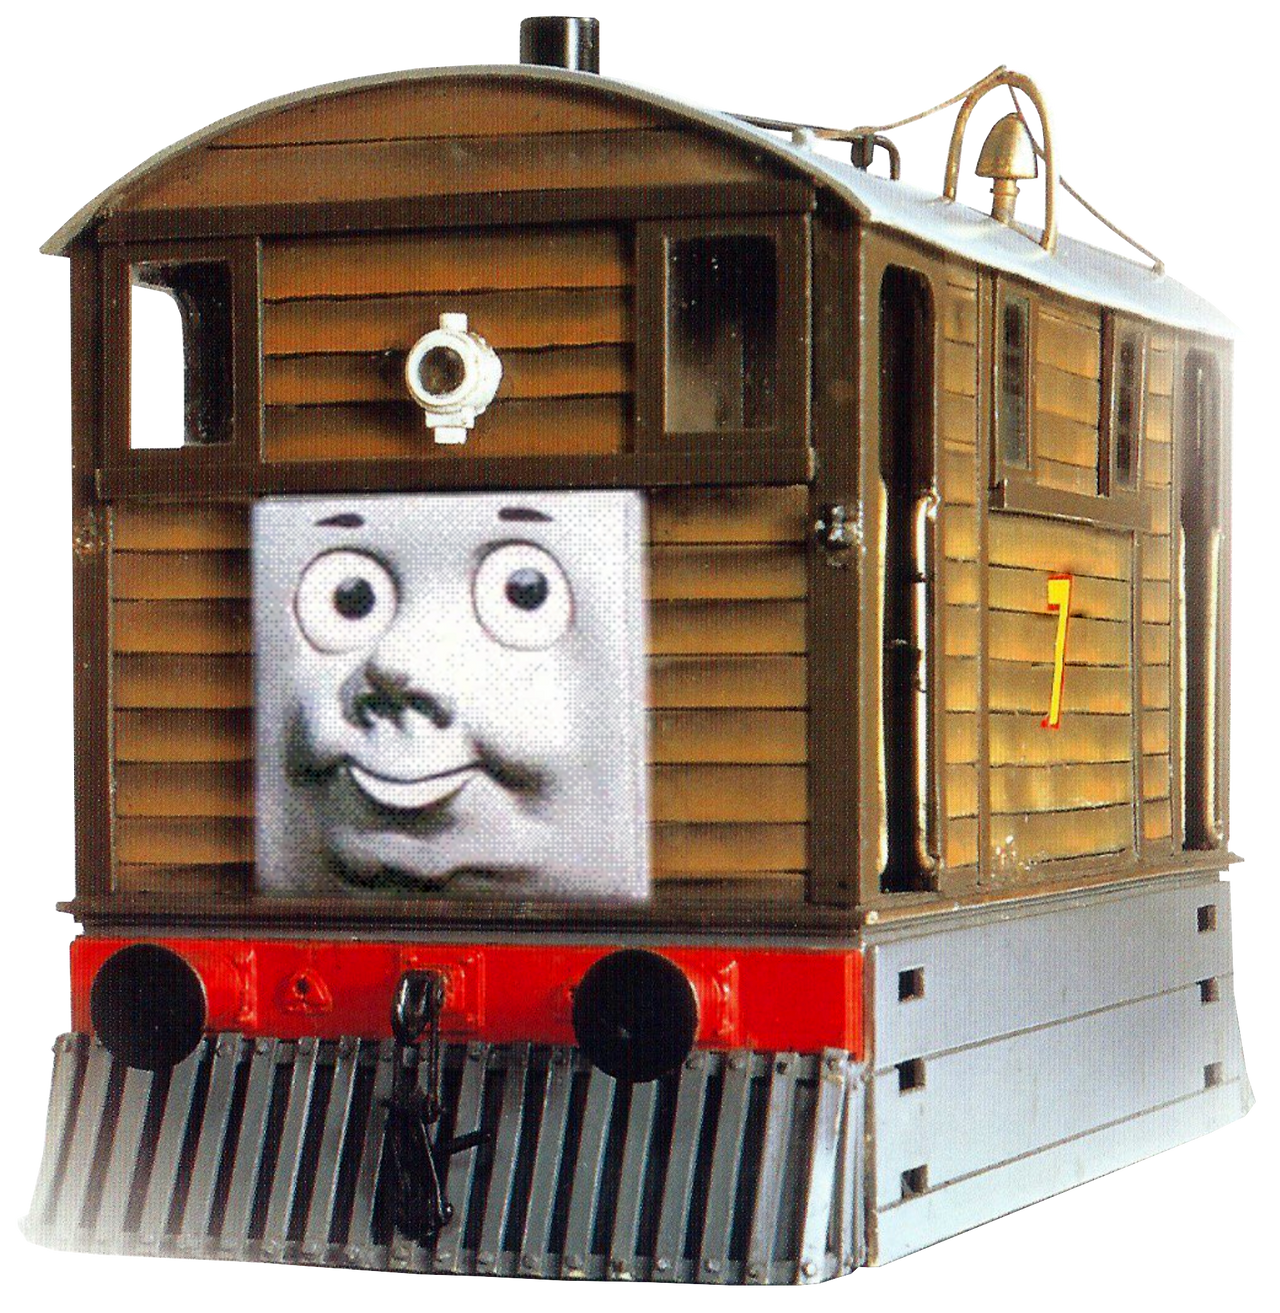 Toby the Tram Engine - Wikipedia